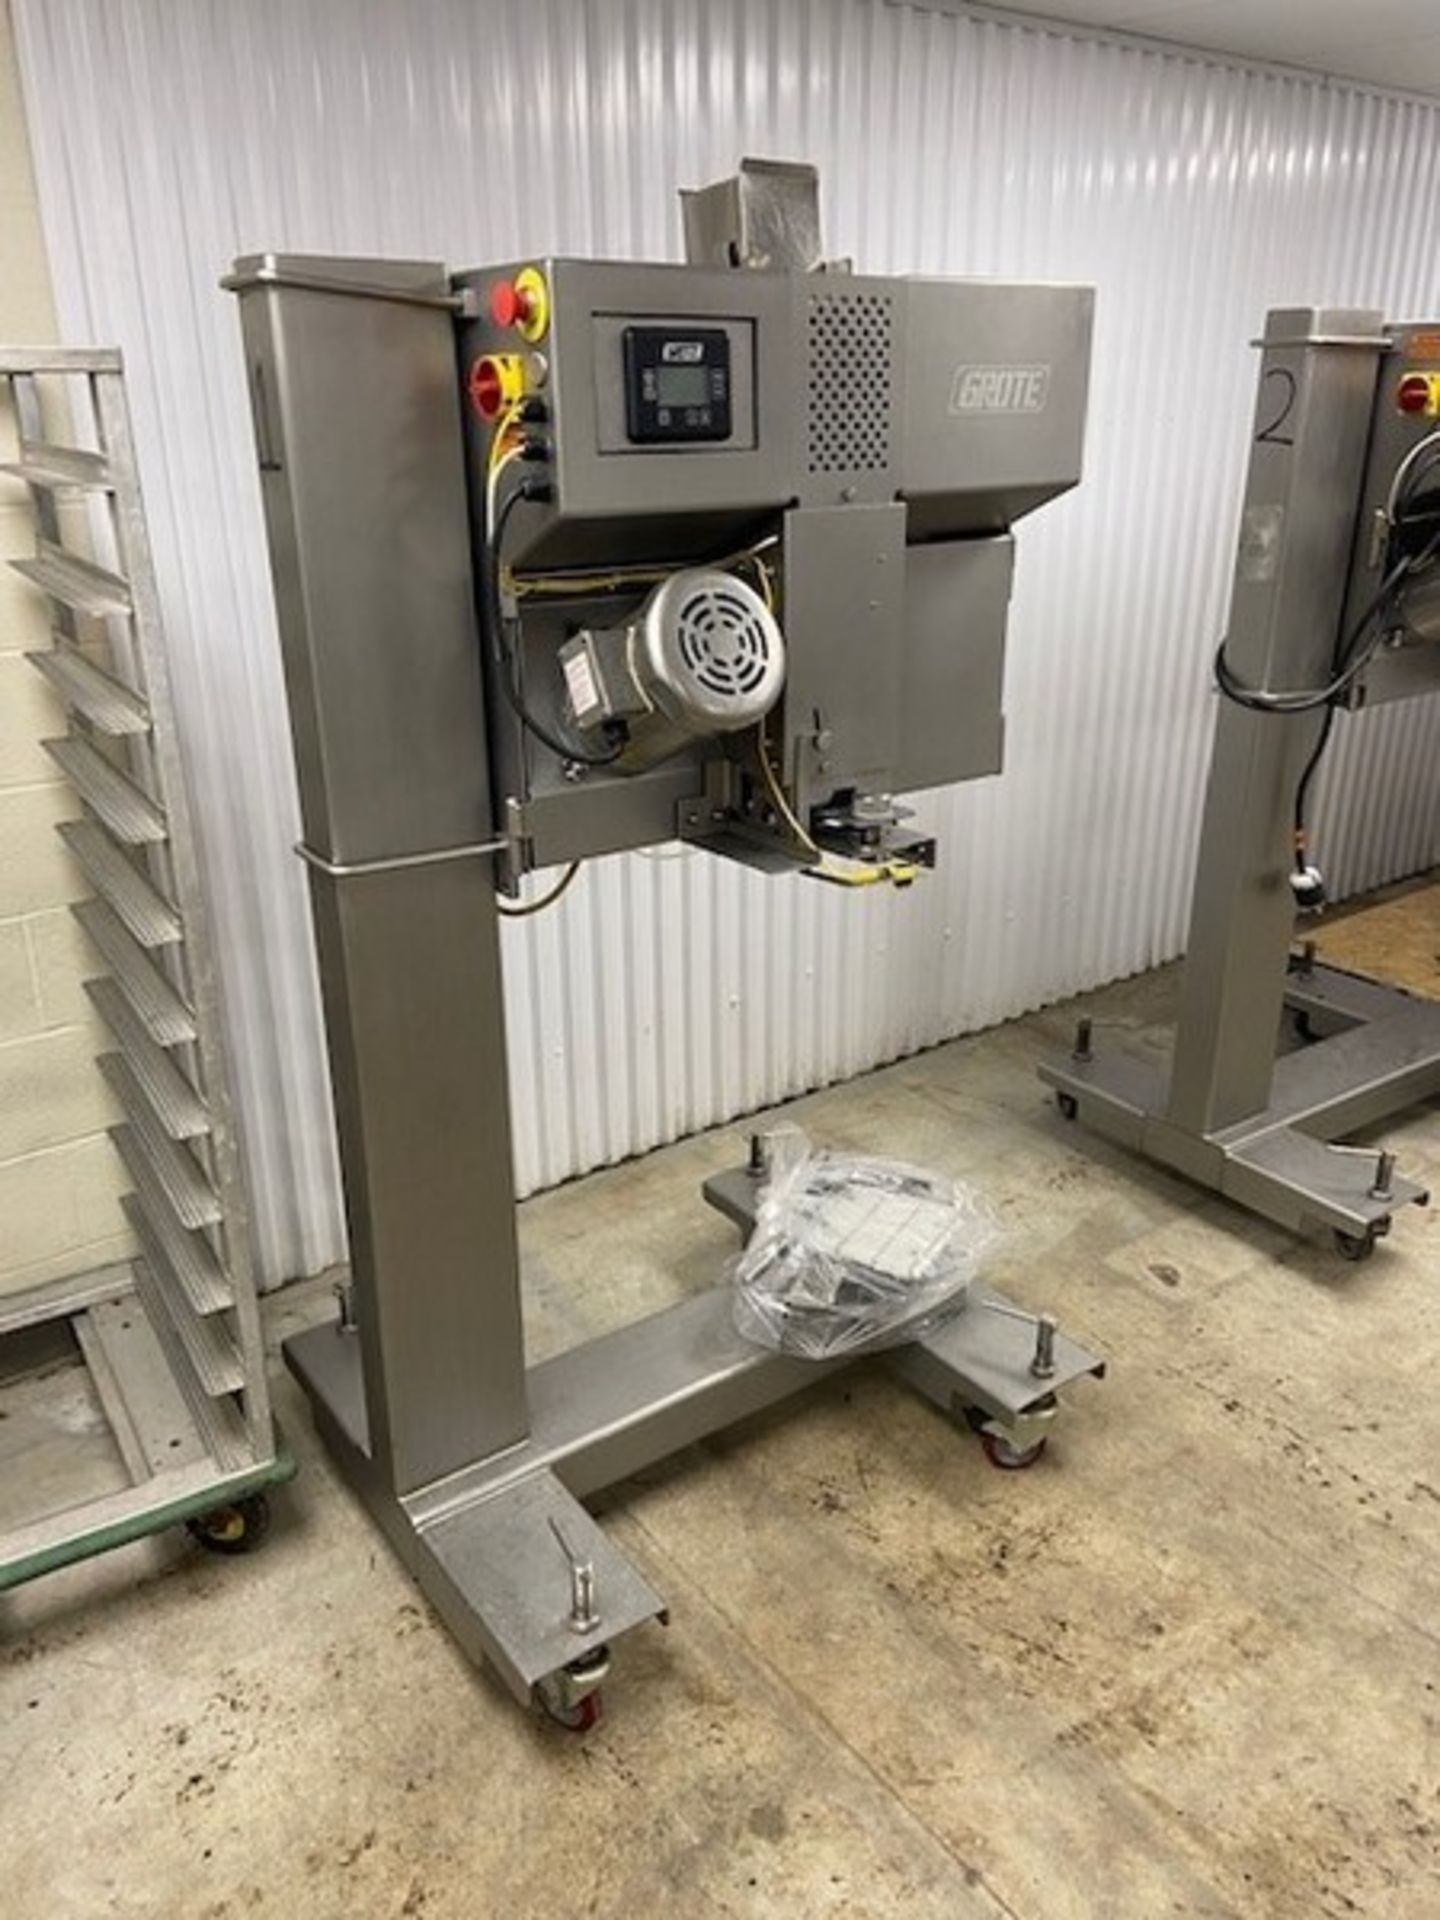 Grote S/S Slicer, M/N SNP-505, S/N 1080423, 220 Volts, 1 Phase, Mounted on Portable Frame (Located - Image 2 of 5